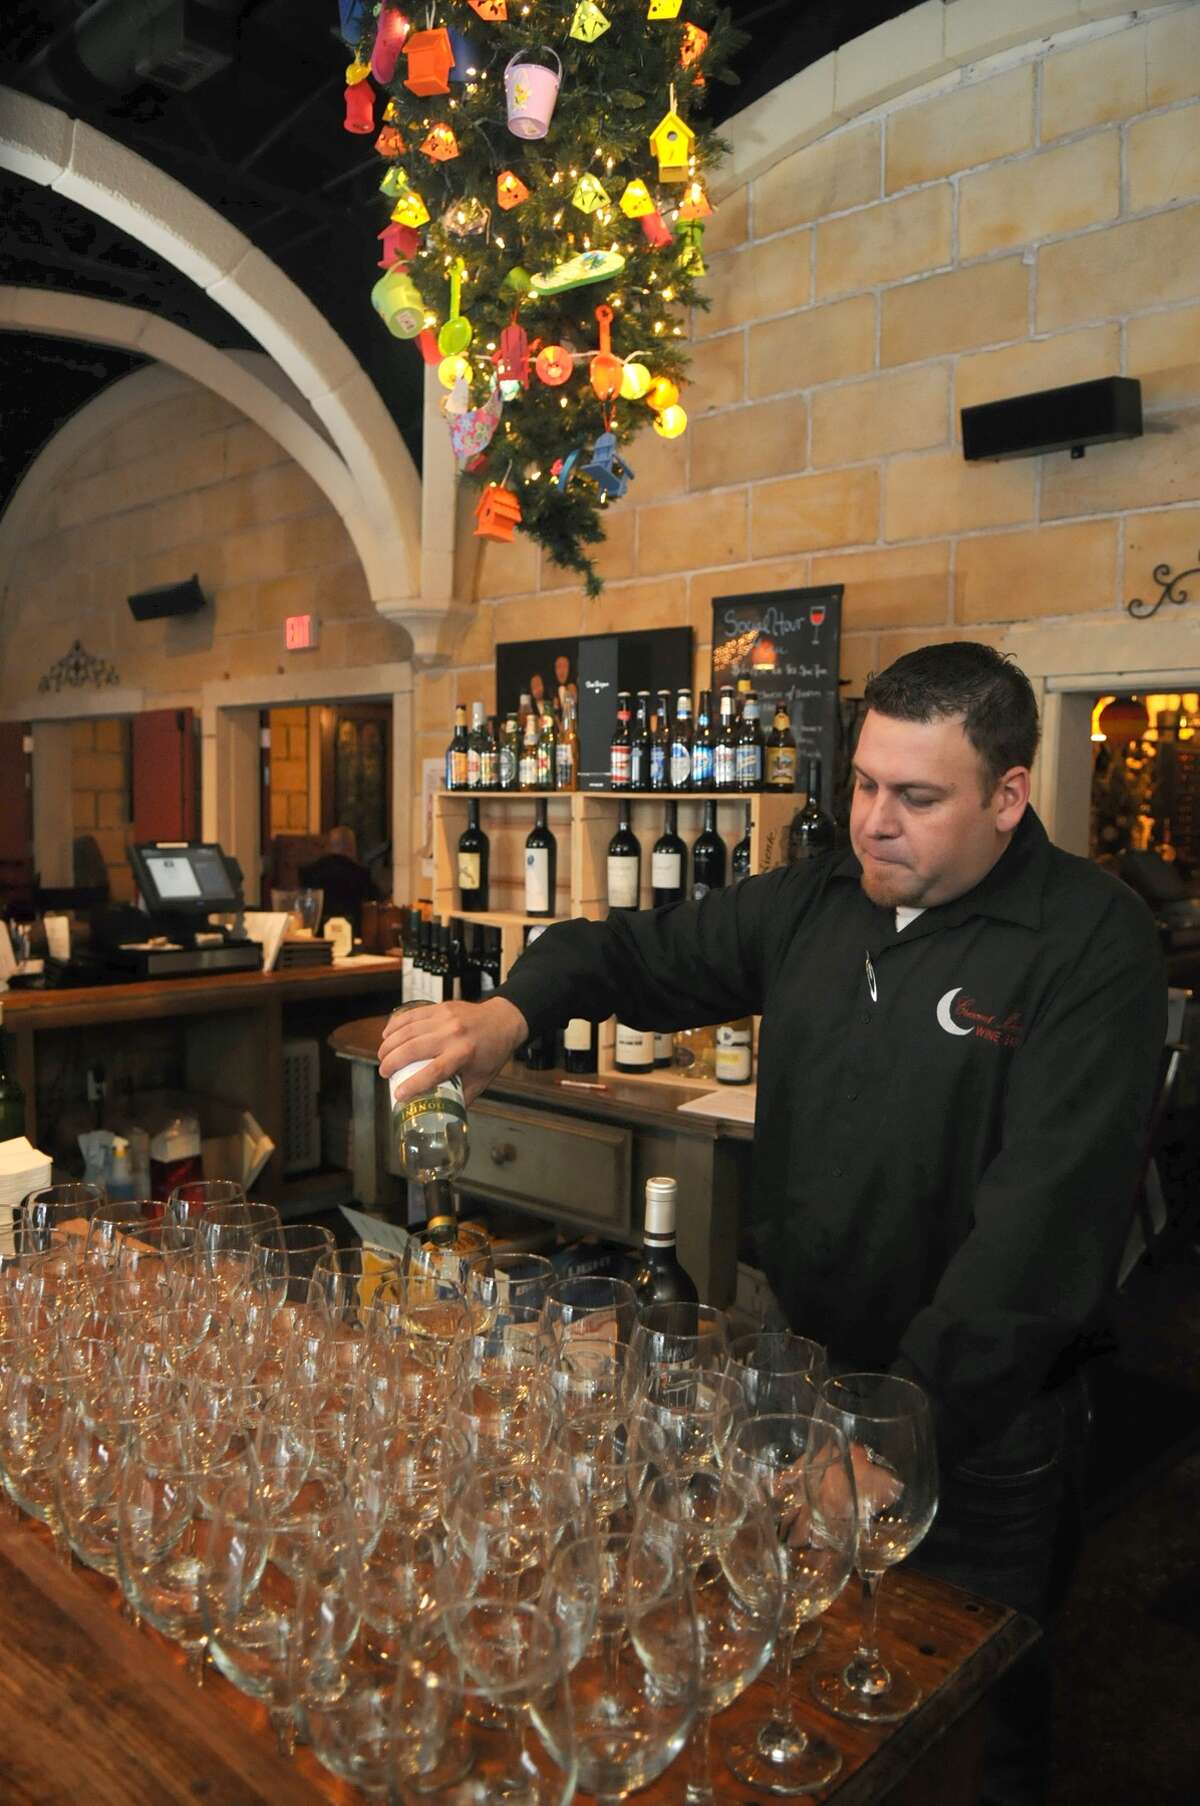 Manager Mike Cantu pours a glass of wine at the Crescent Moon Wine Bar and Restaurant in Spring.